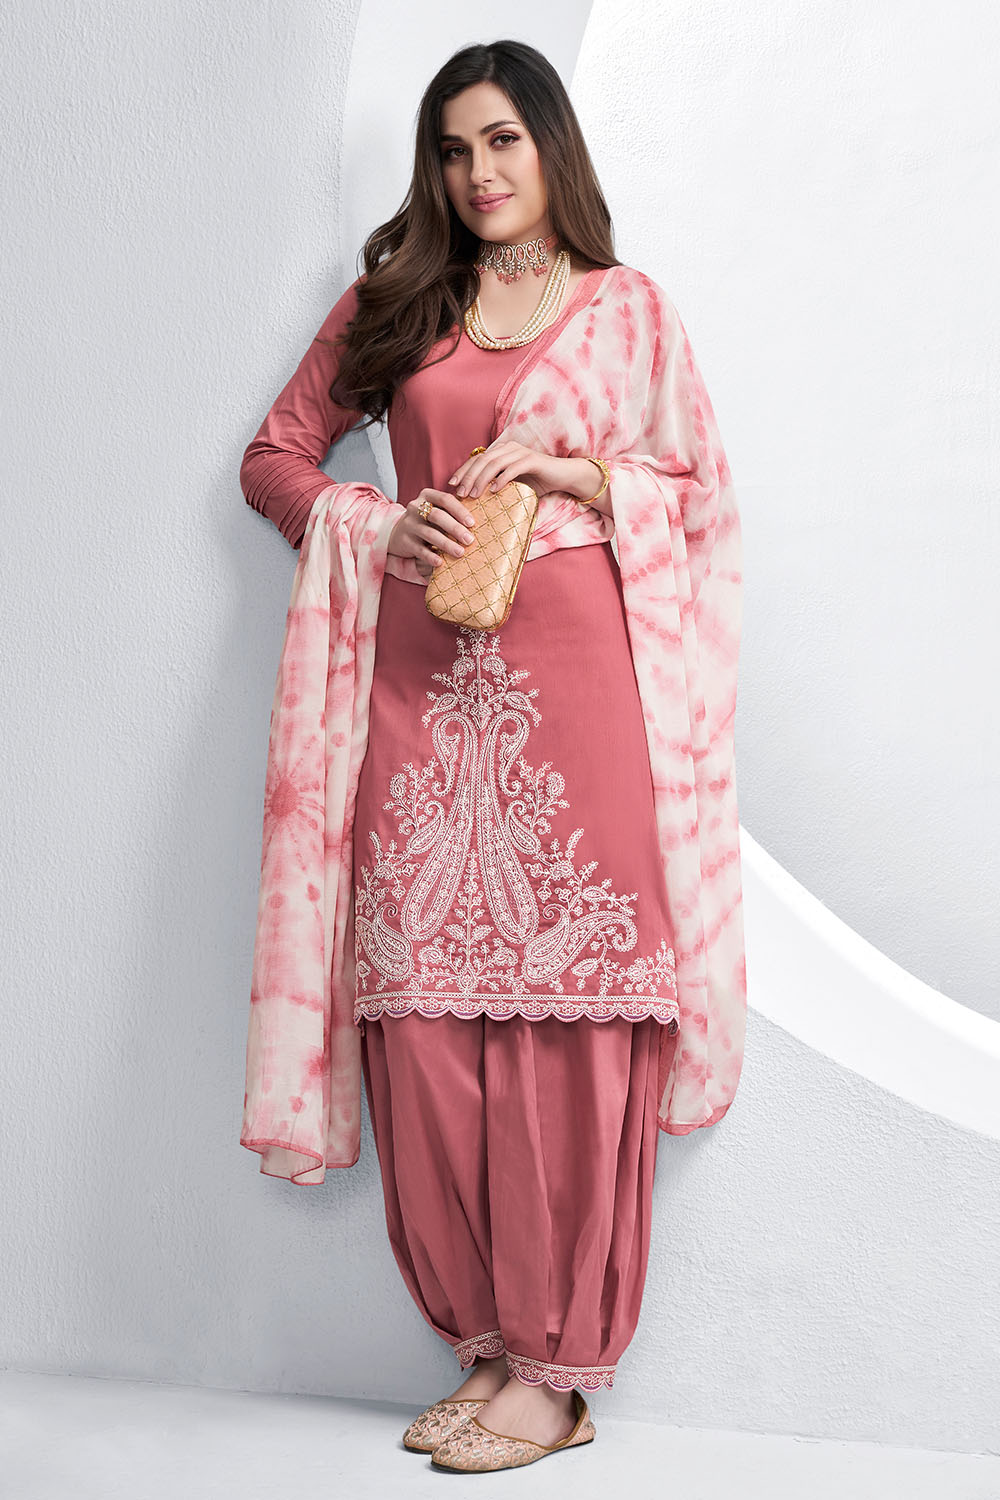 Dusty Pink Color Cotton Hemline Embroidered Unstitched Suit Material